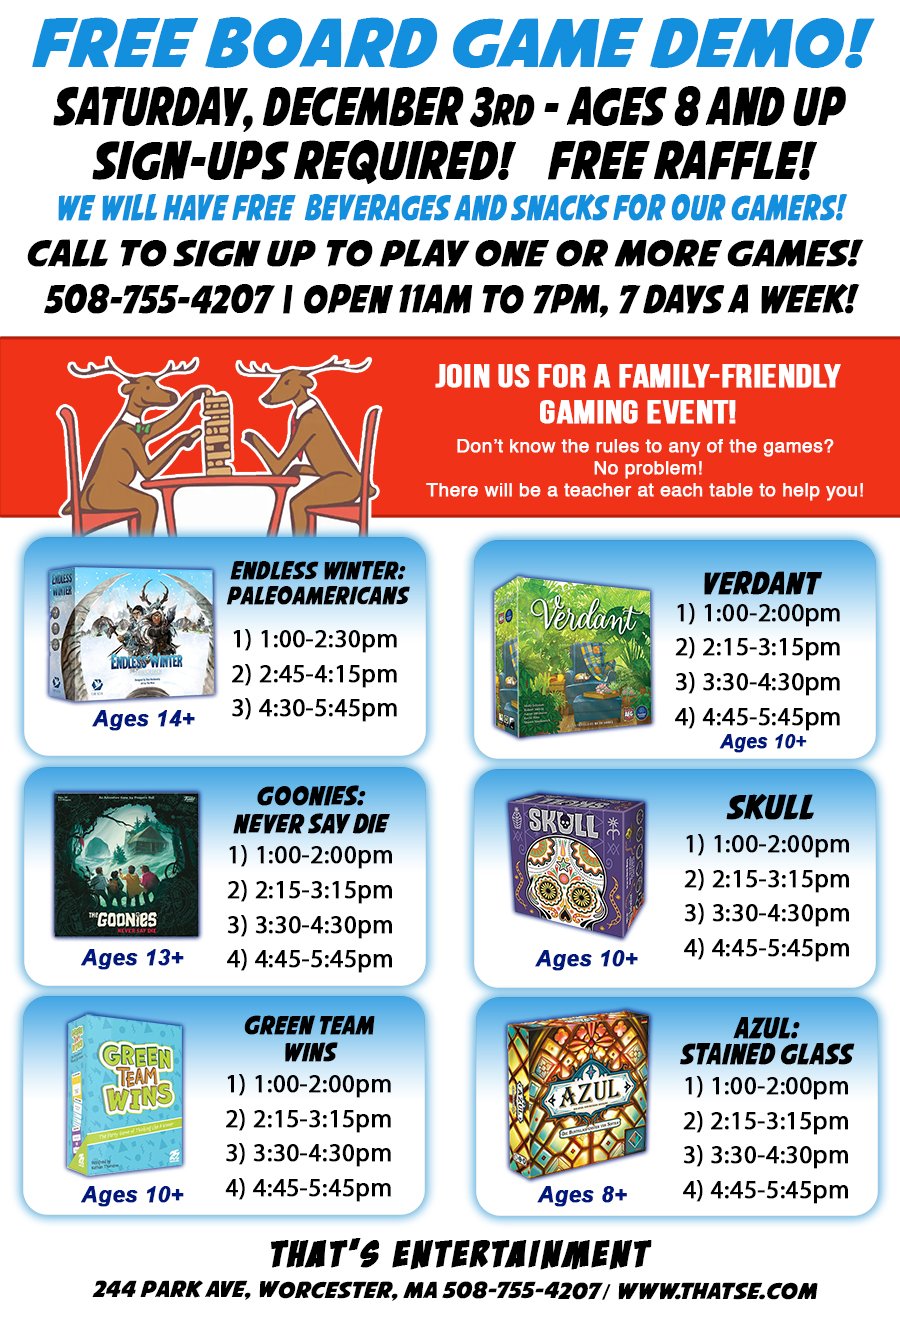 Free Board Game Demonstration on Saturday, December 3rd at That's E Worcester